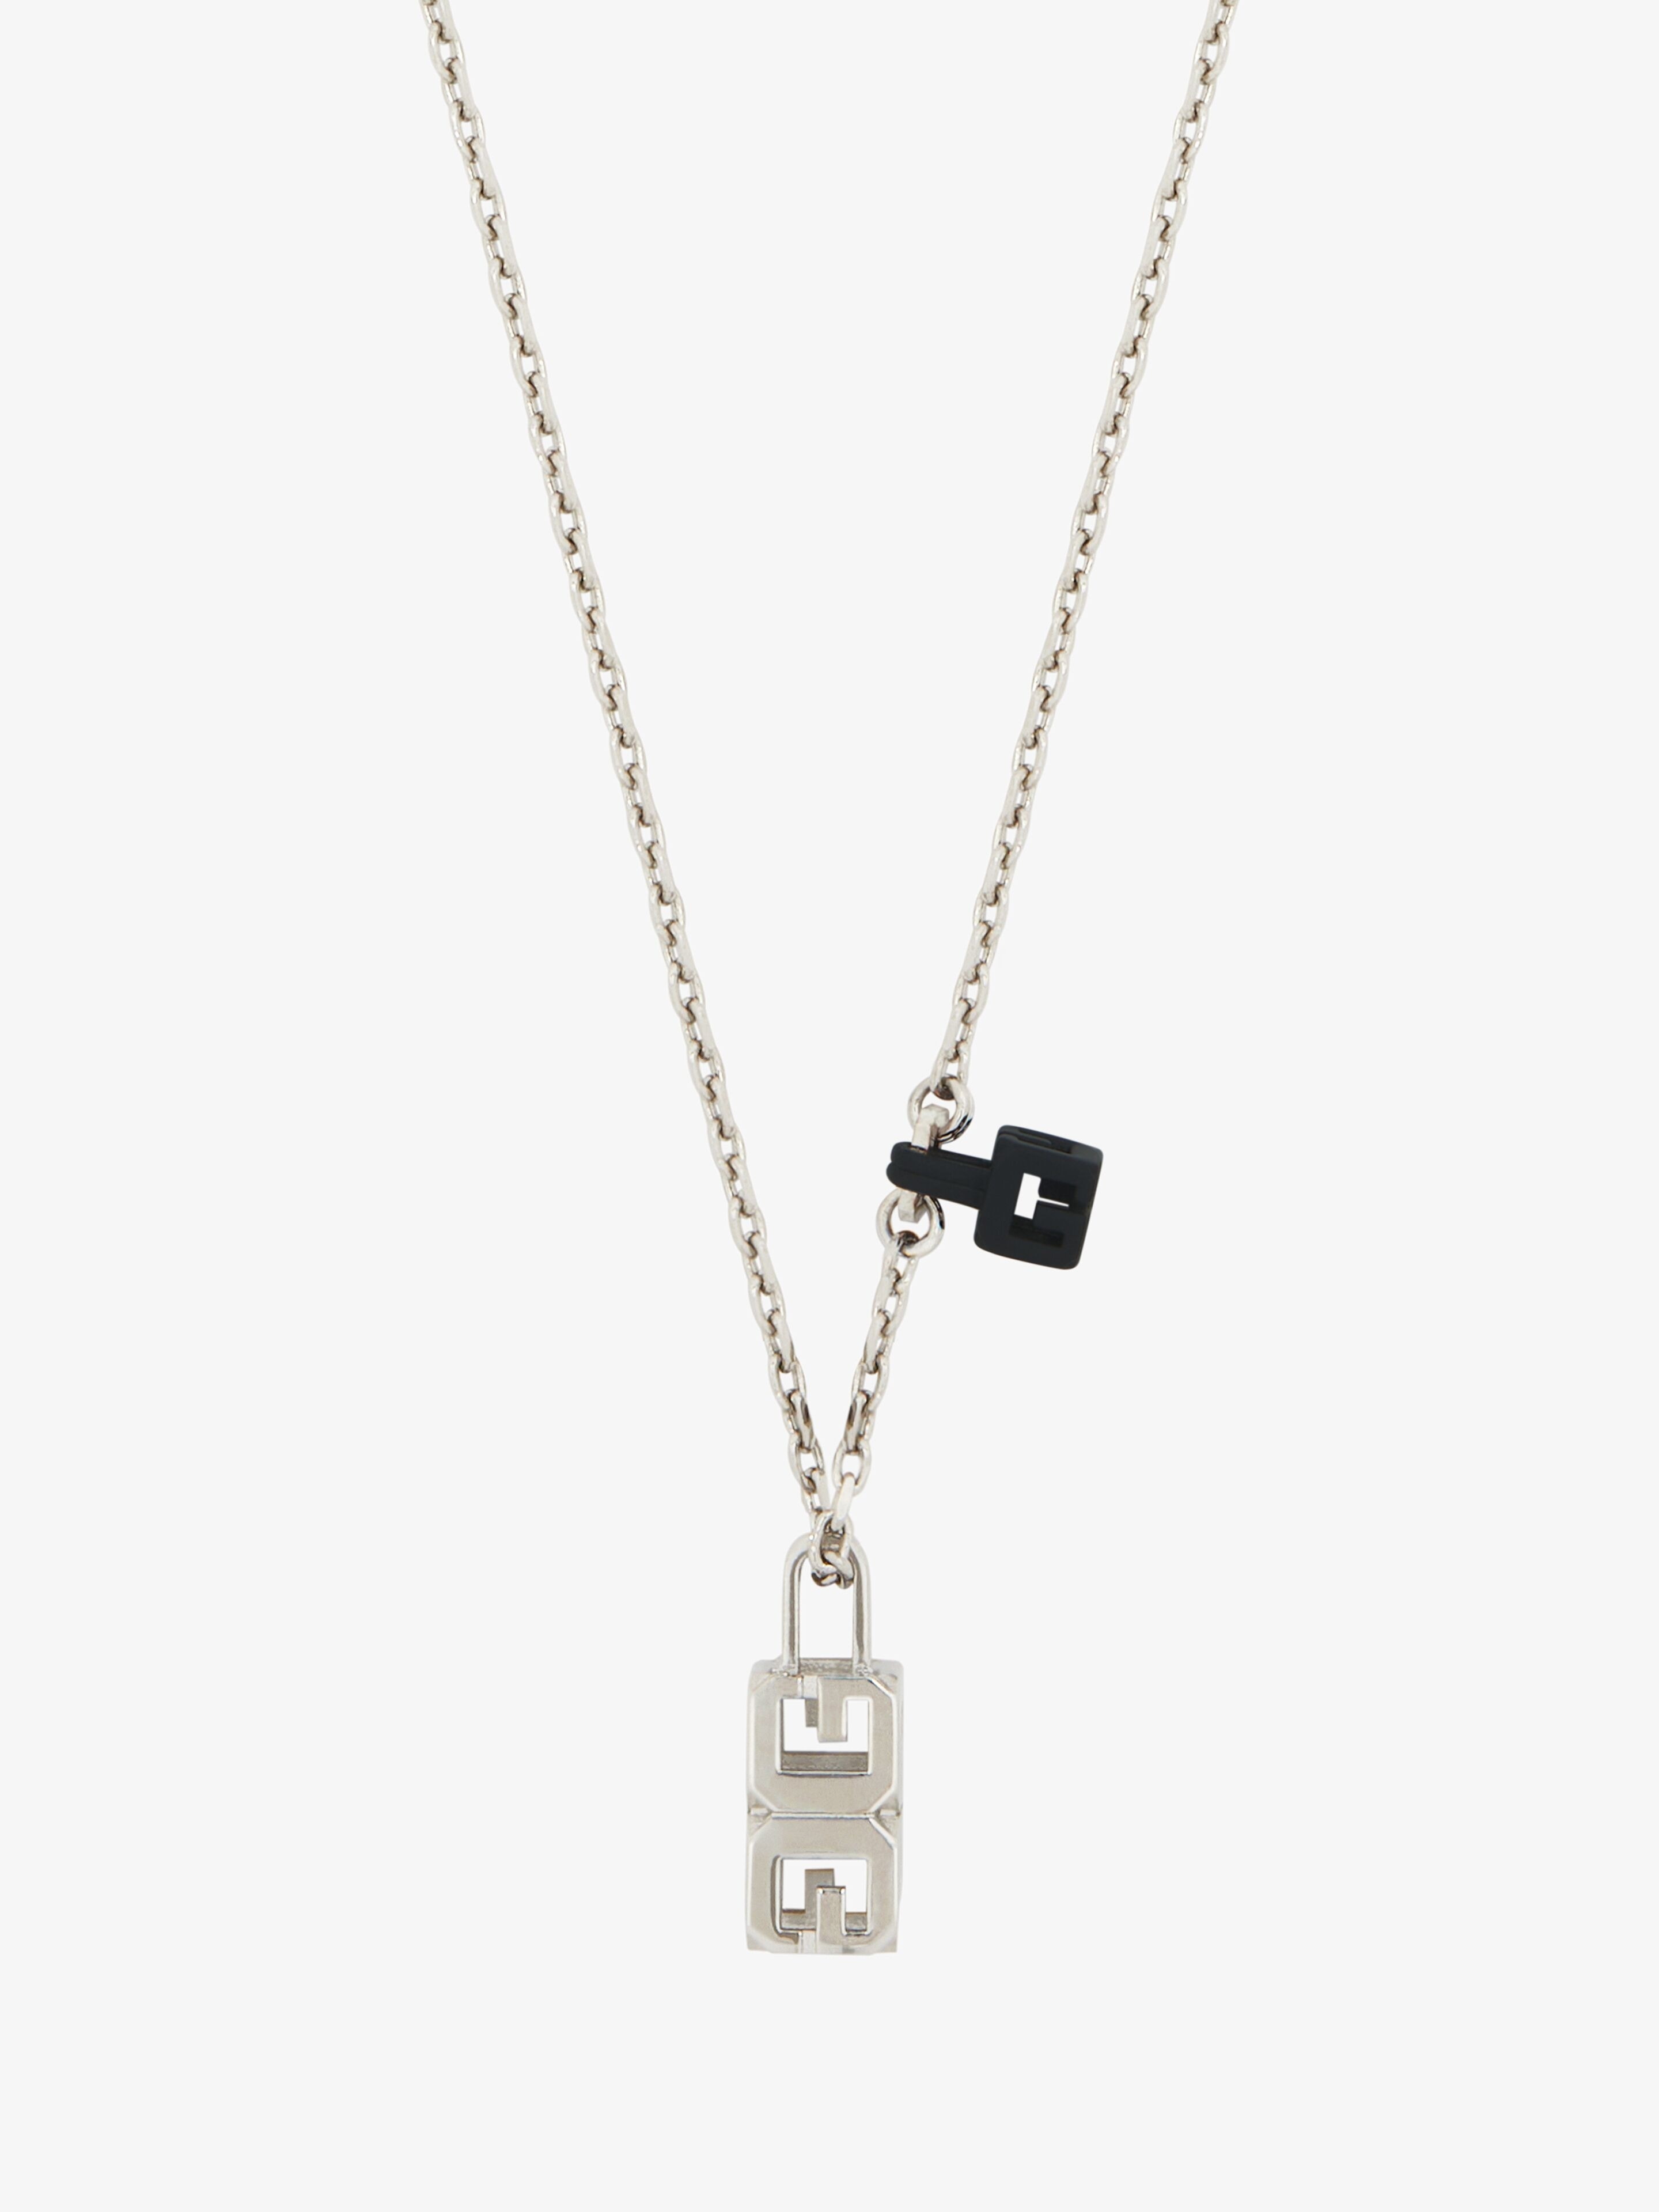 G CUBE PENDANT NECKLACE IN METAL - 2